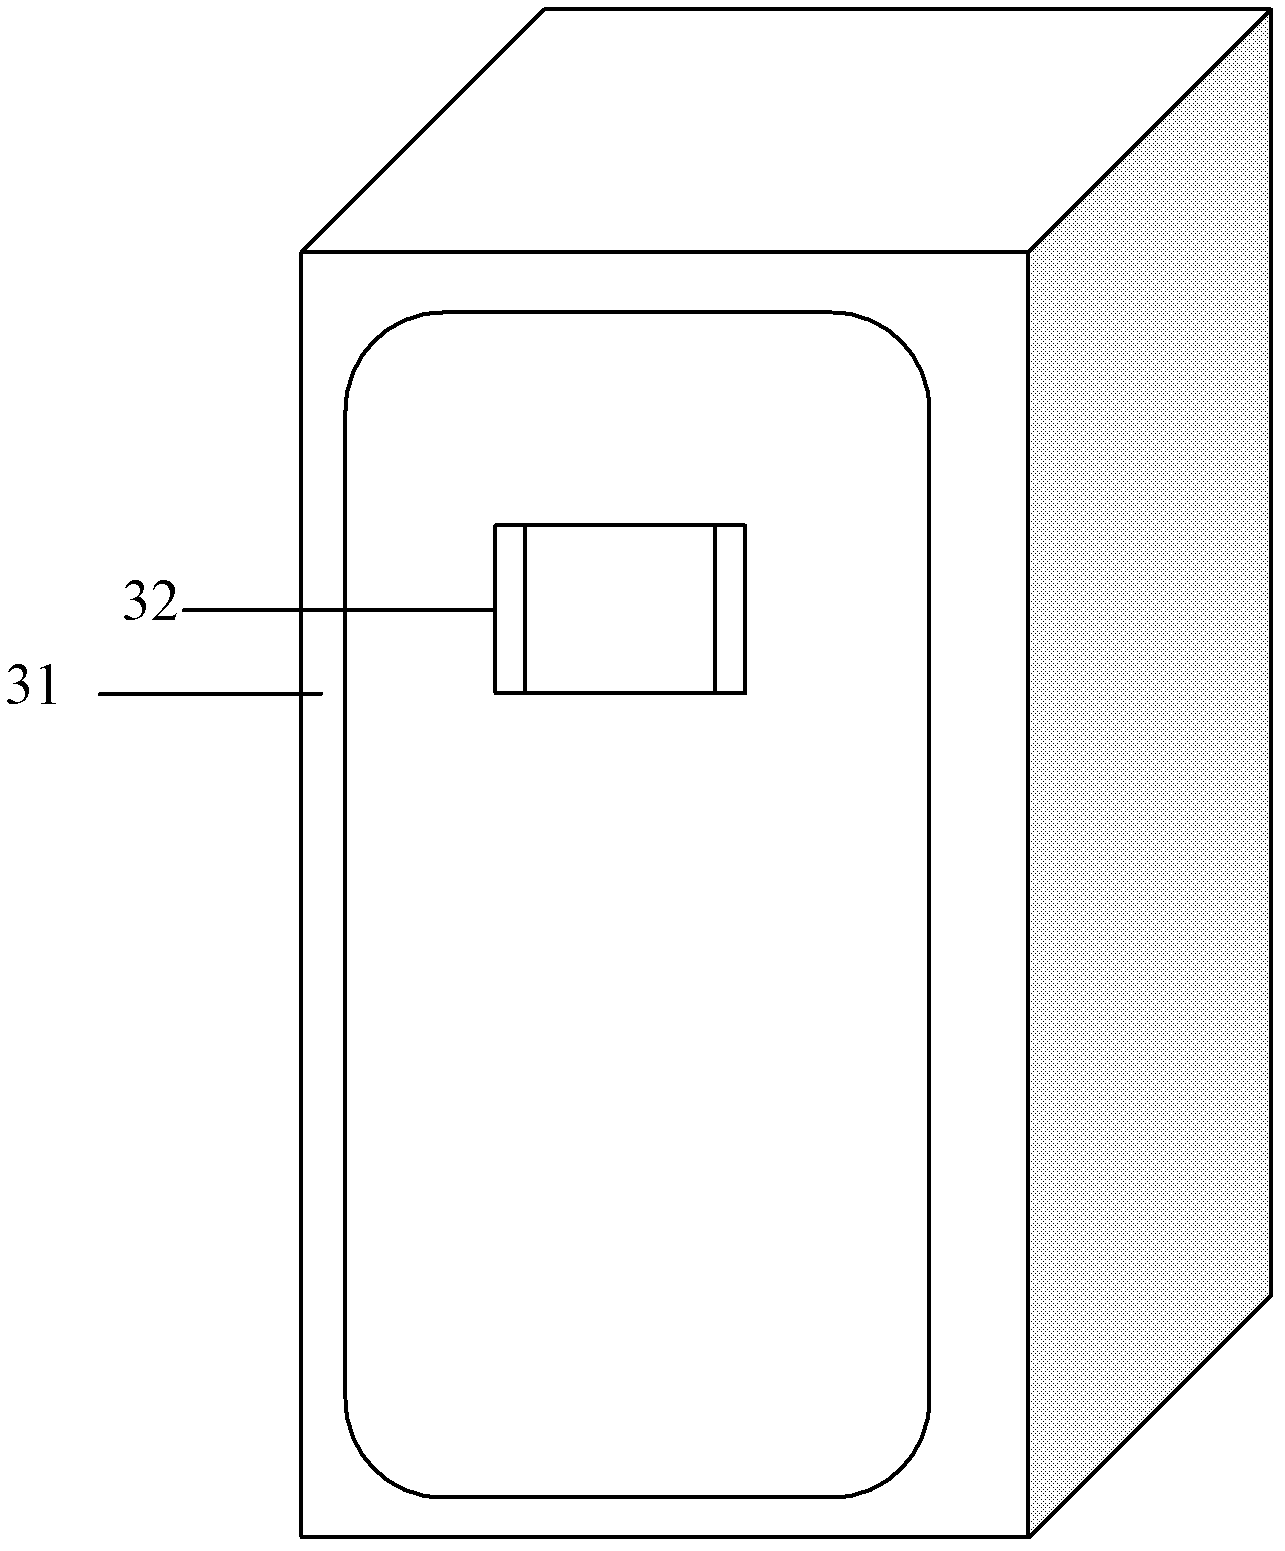 Network terminal cabinet system for distributed control system (DCS) instruction